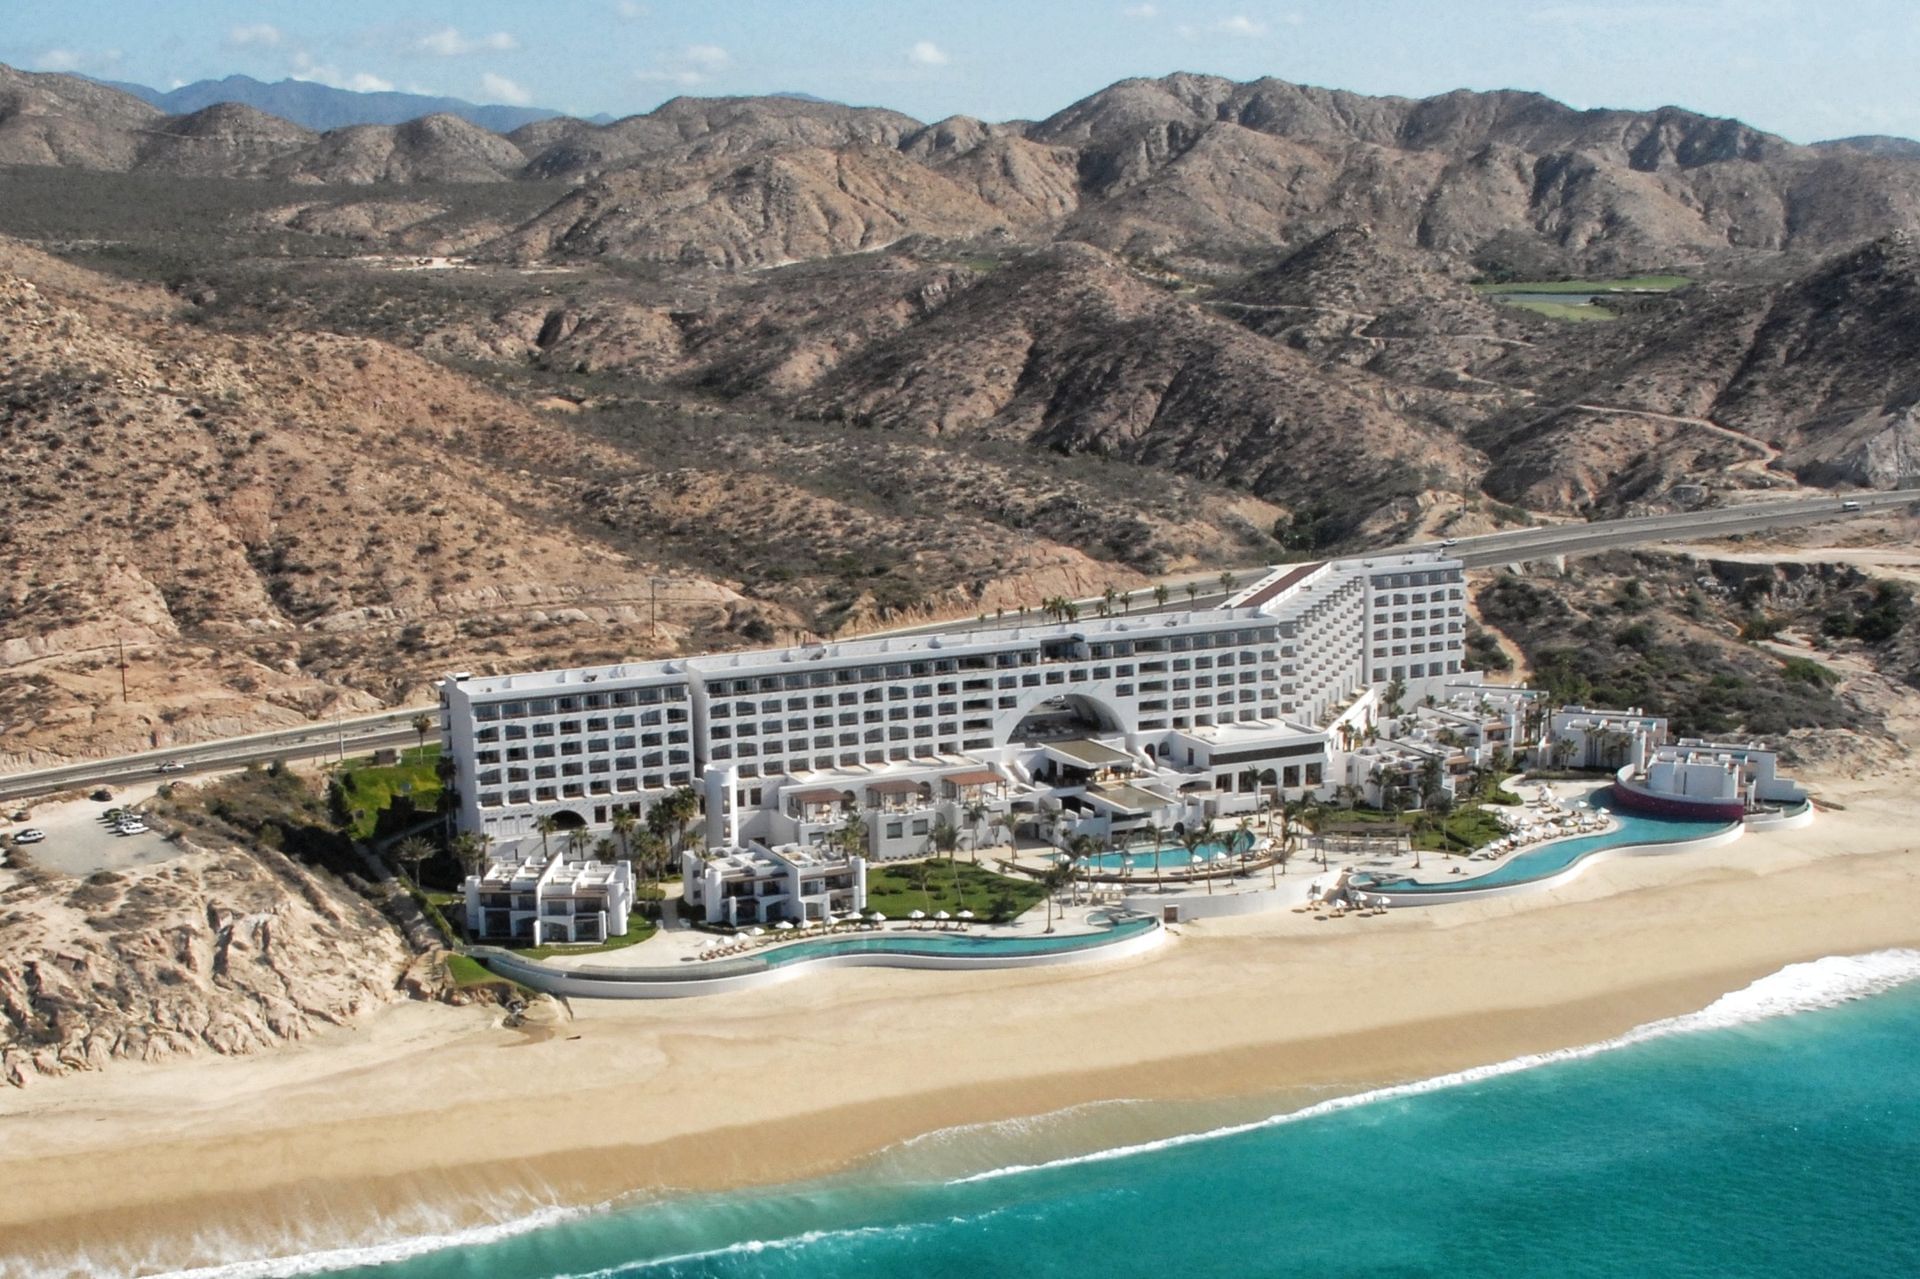 Splendid aerial view of the Marquis Los Cabos with the ocean